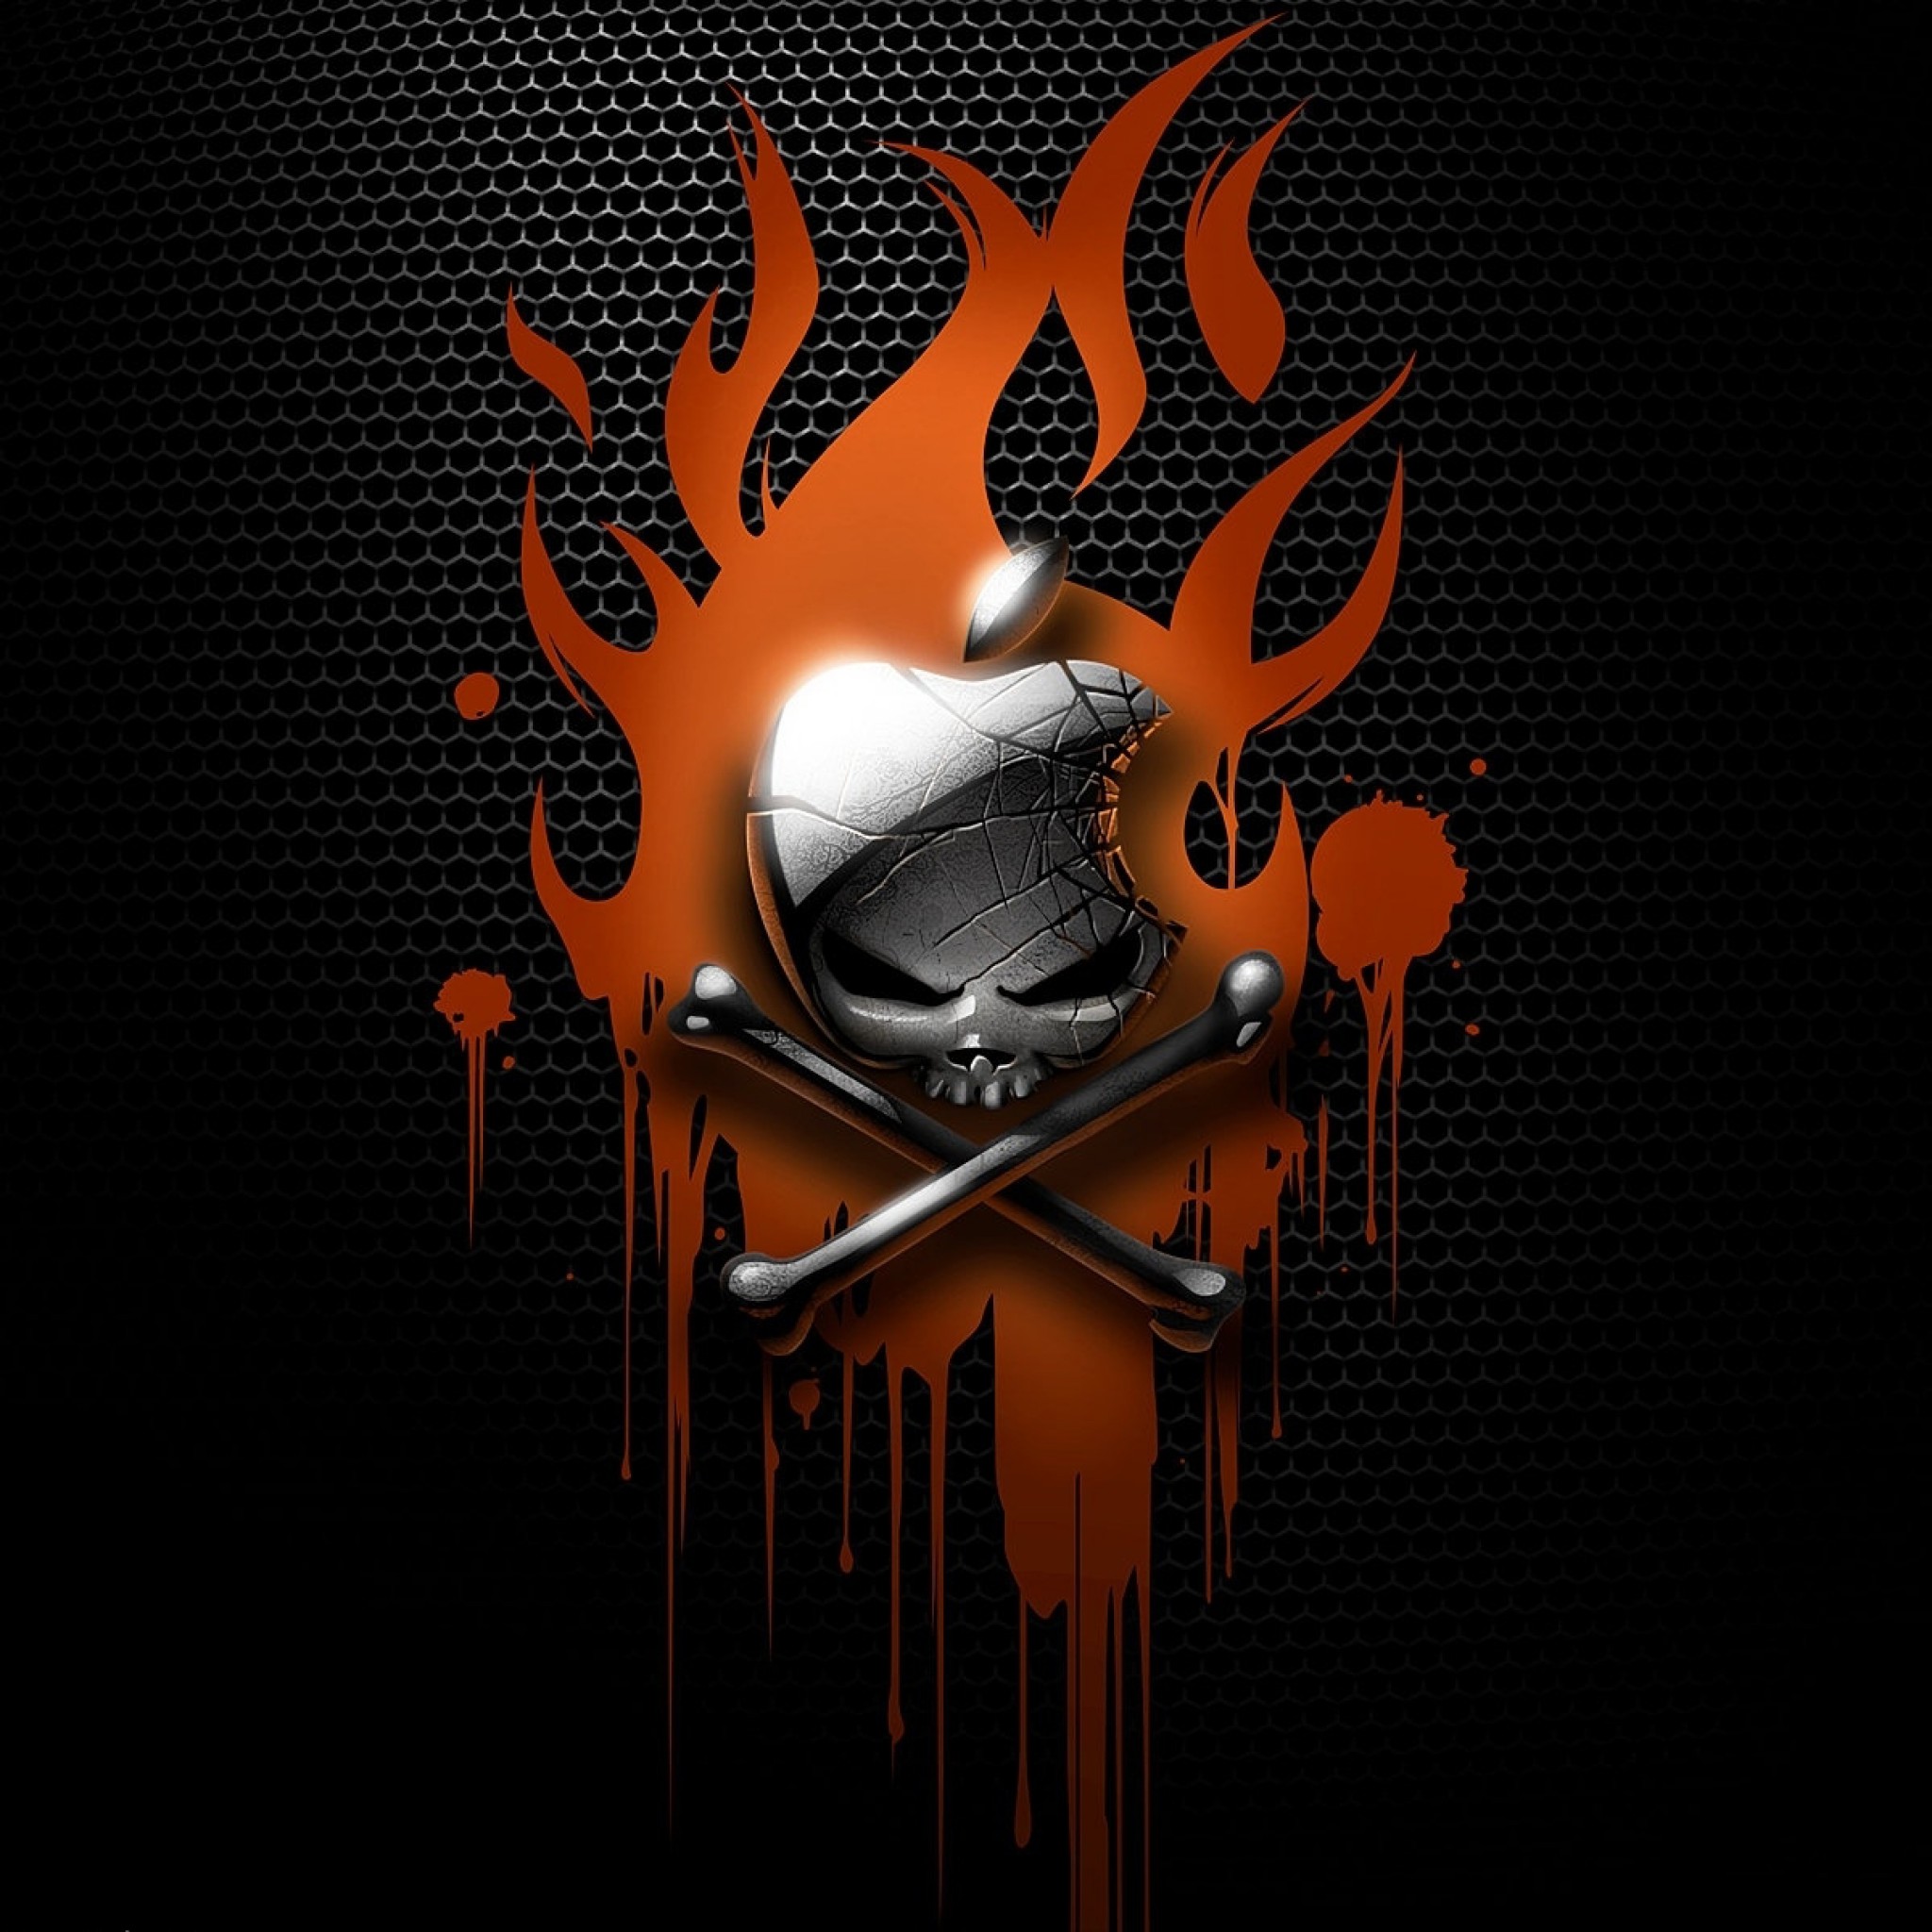 Fantasy Scary Silver Skull Apple Logo Theme In Red Burning Fire Backgorund Volcadot Wall Hd Wallpaper 2048x2048px Apple Logo Wallpaper For Iphone 4 Apple Logo Background For Desktop Symbols On A